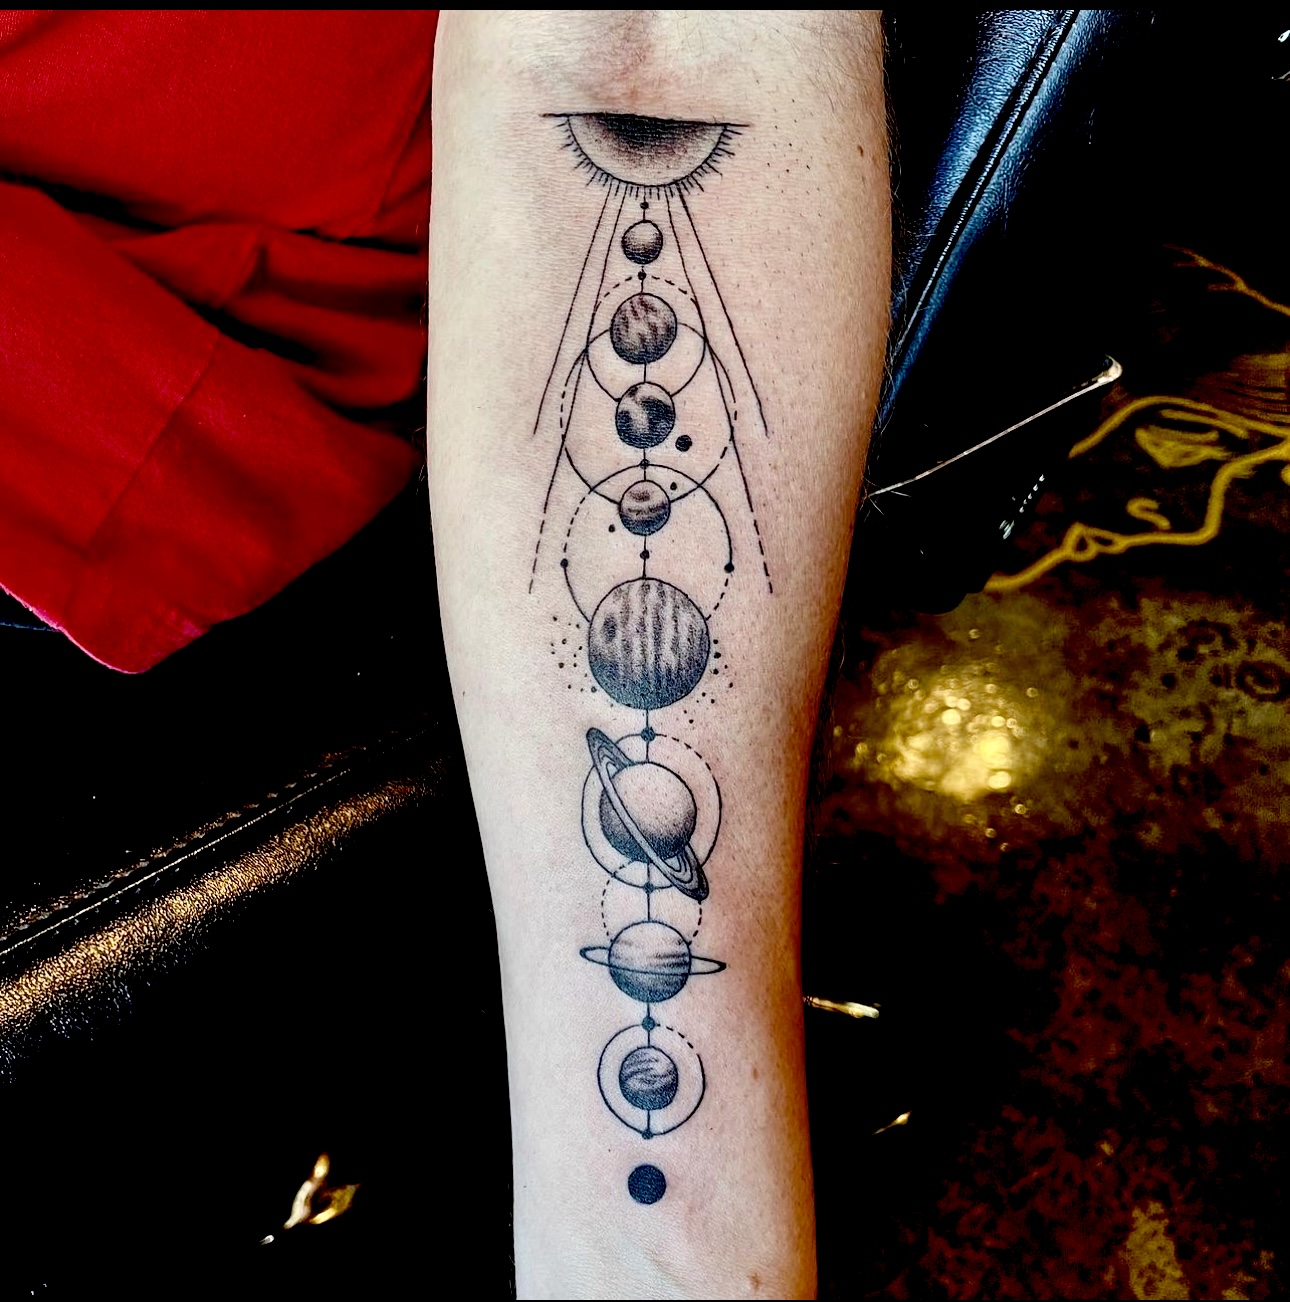 Celestial tattoo from a shop in Dallas